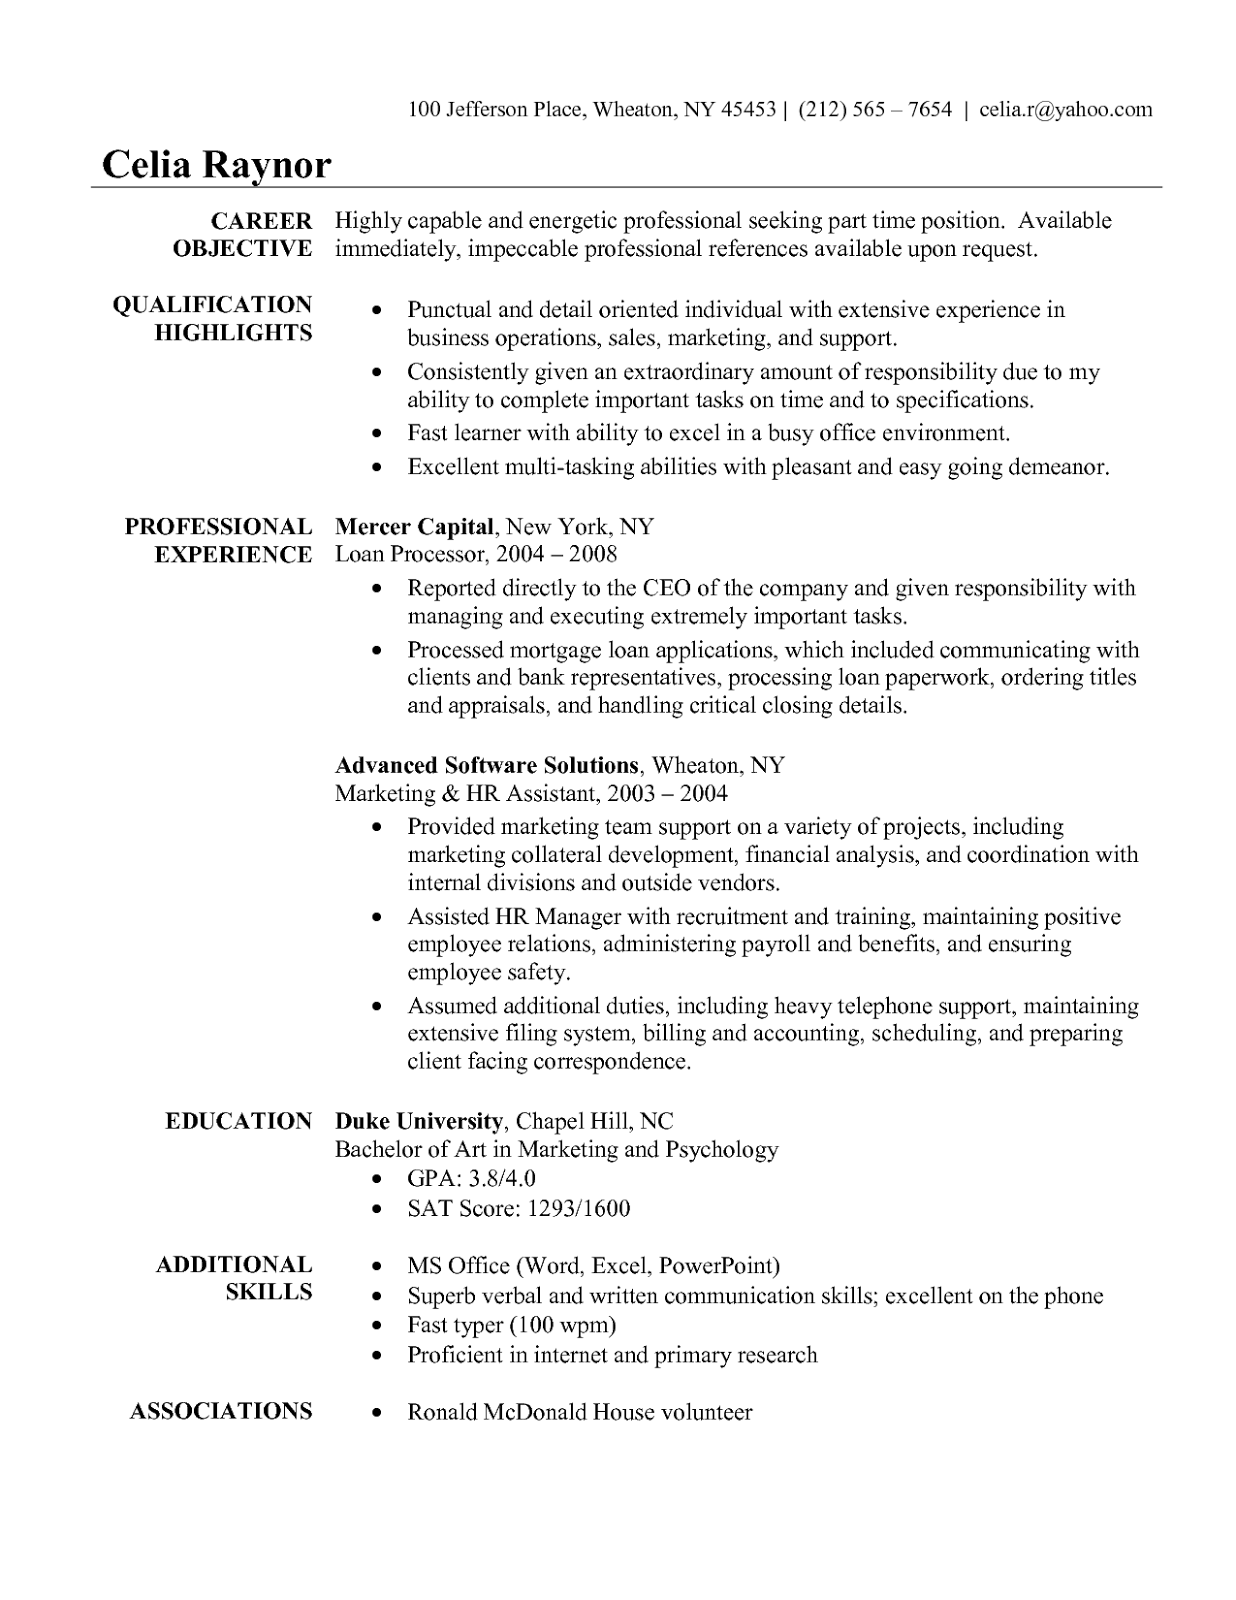 Sample resume for guidance counselor position